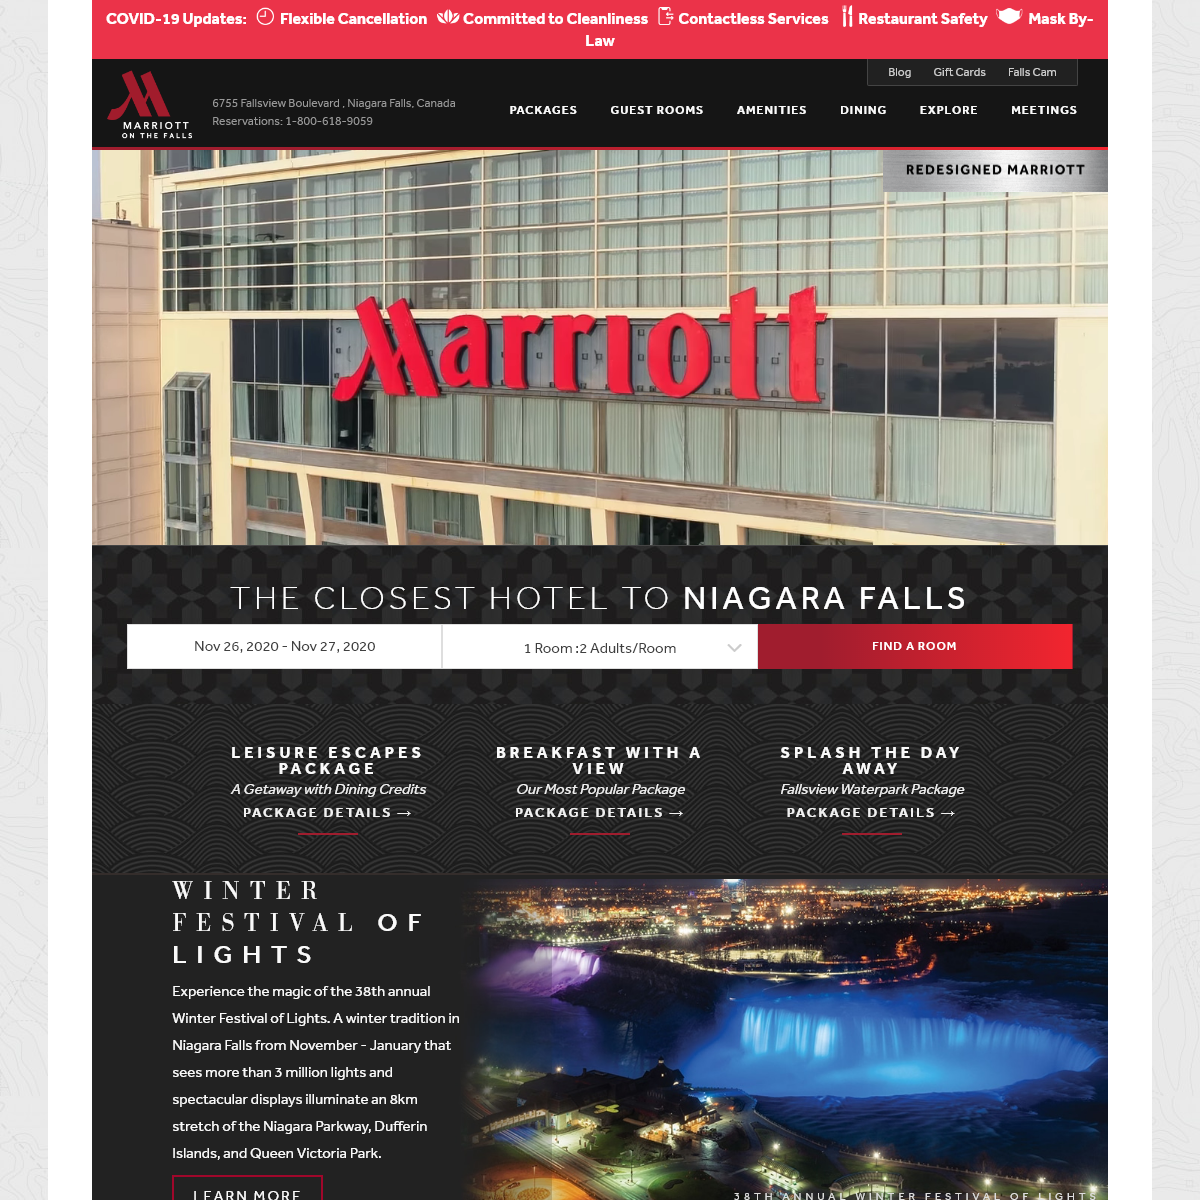 A complete backup of marriottonthefalls.com